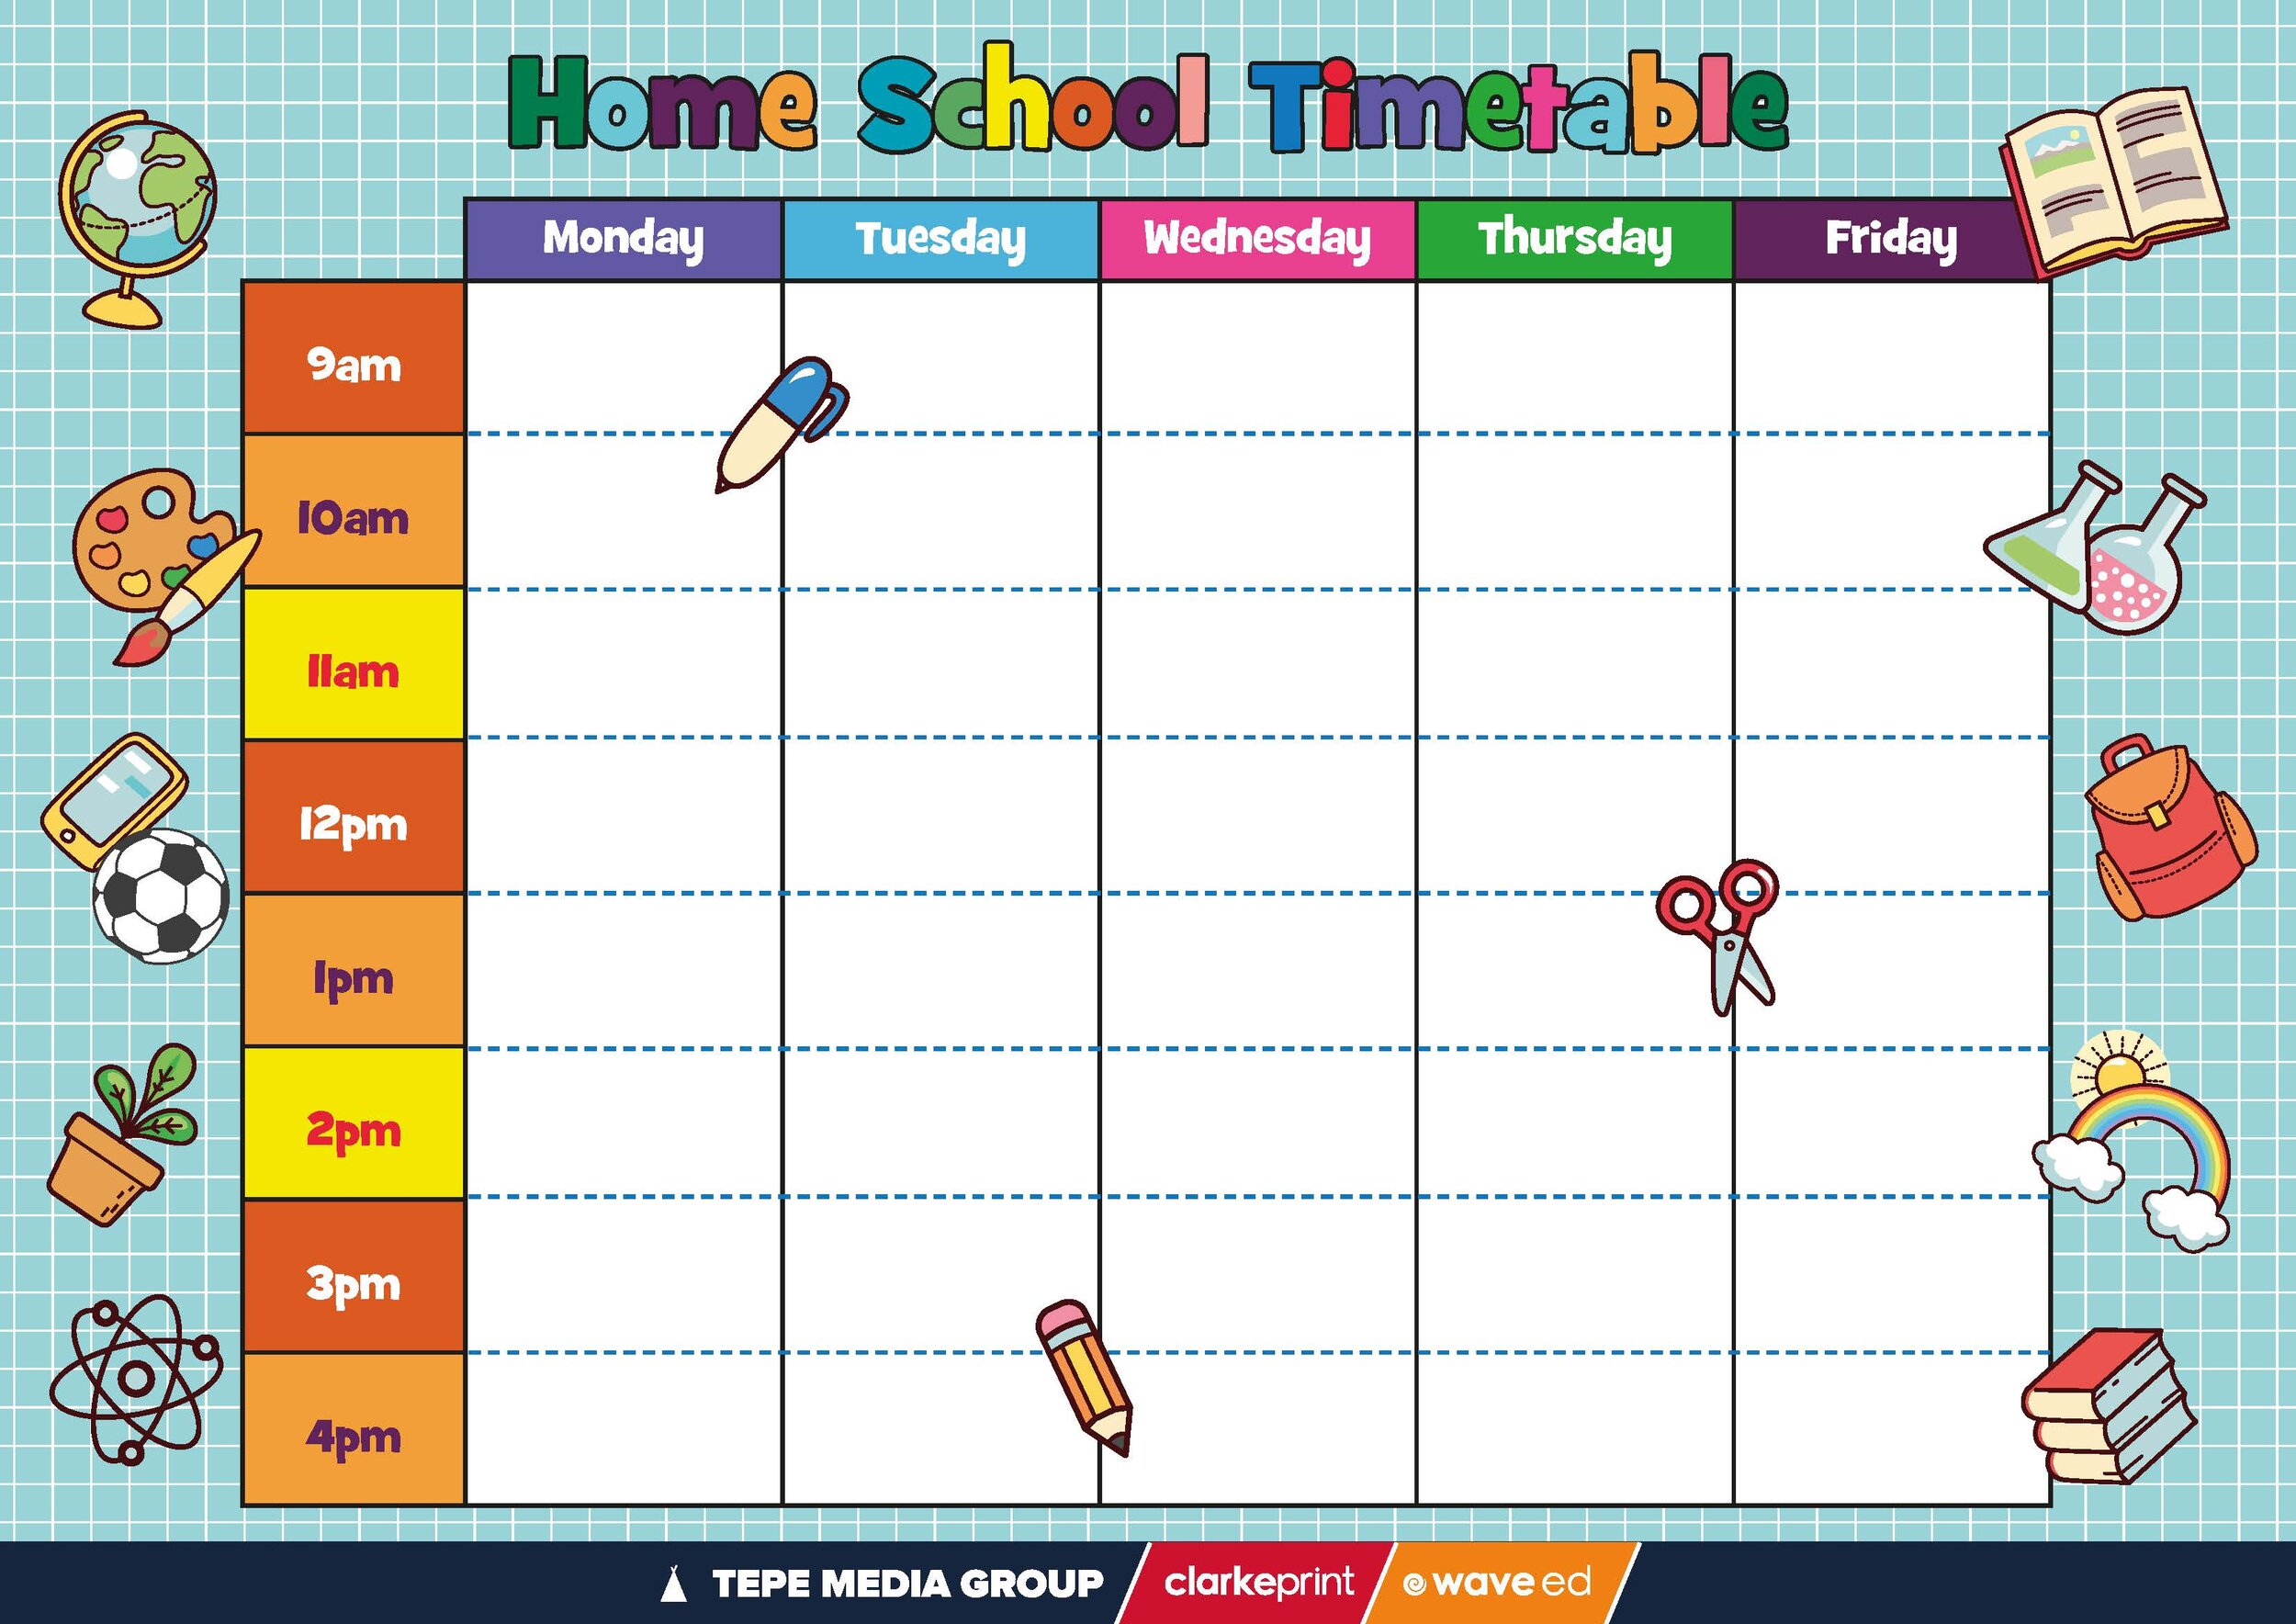 time table for homework